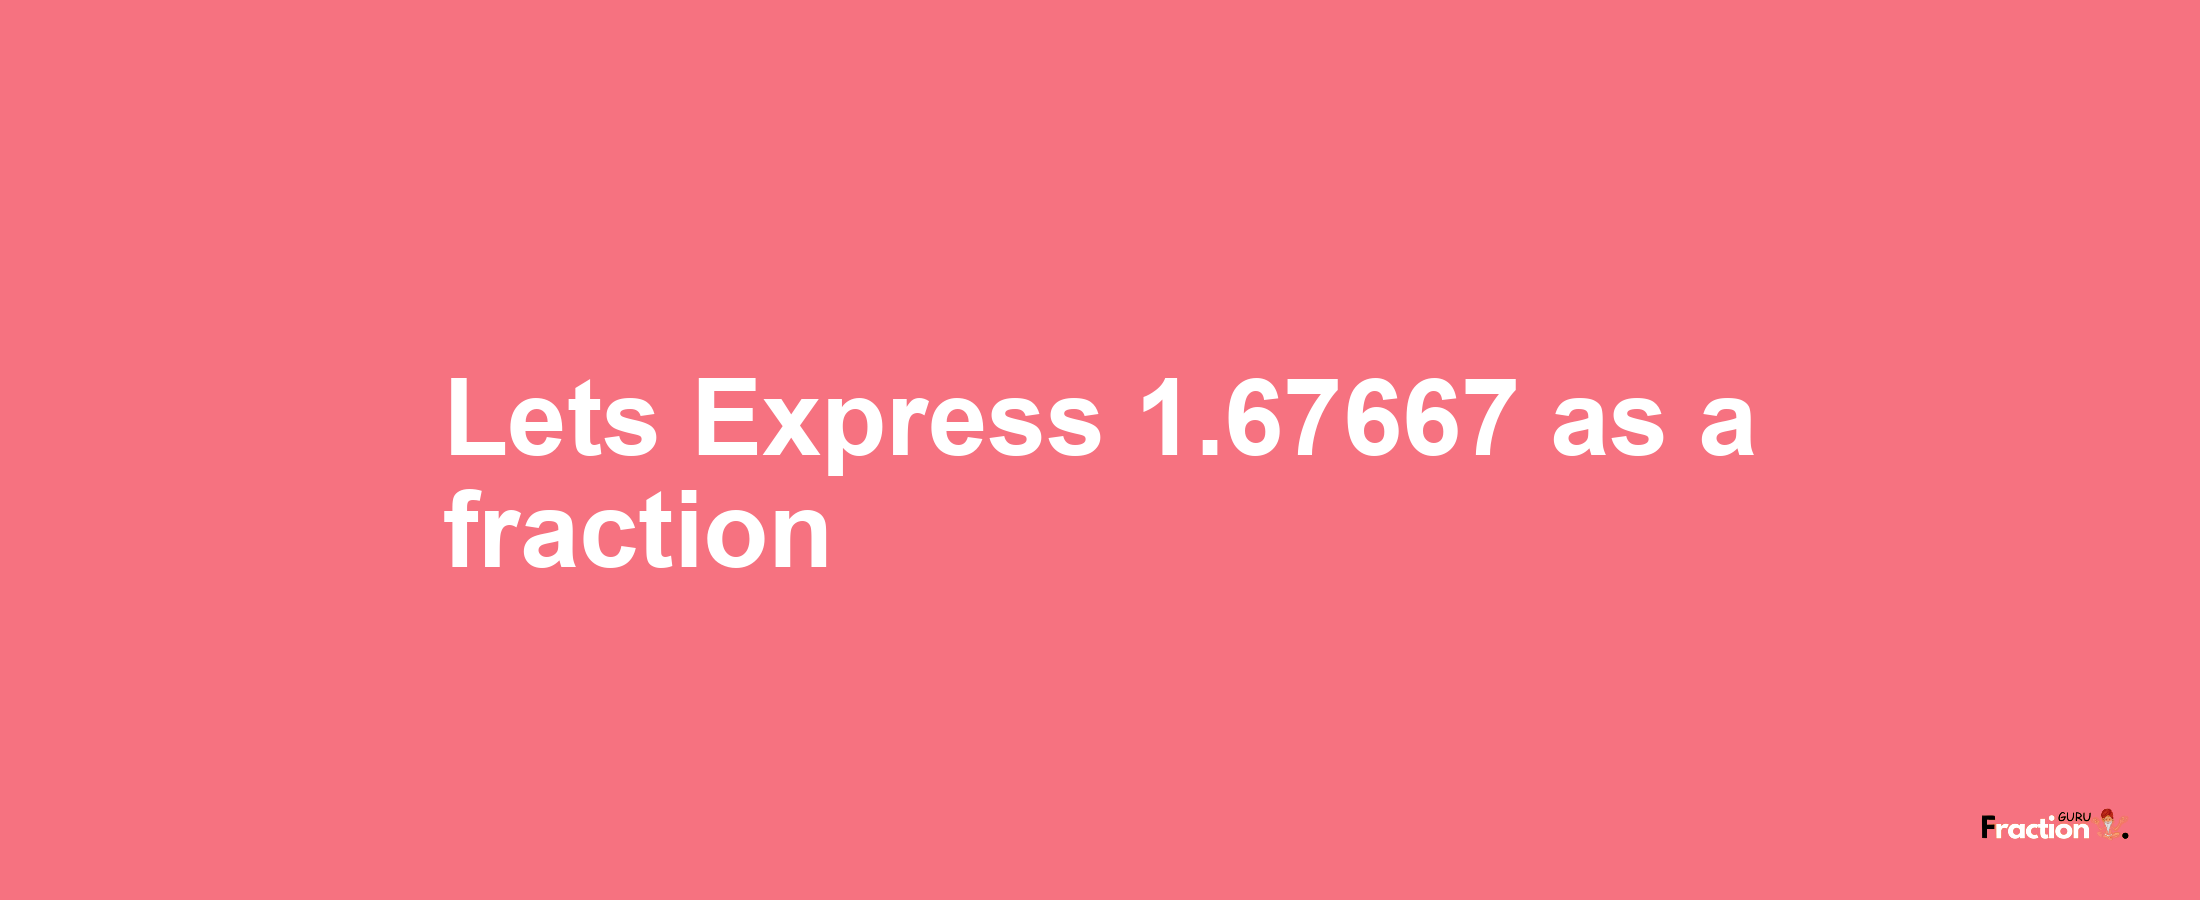 Lets Express 1.67667 as afraction